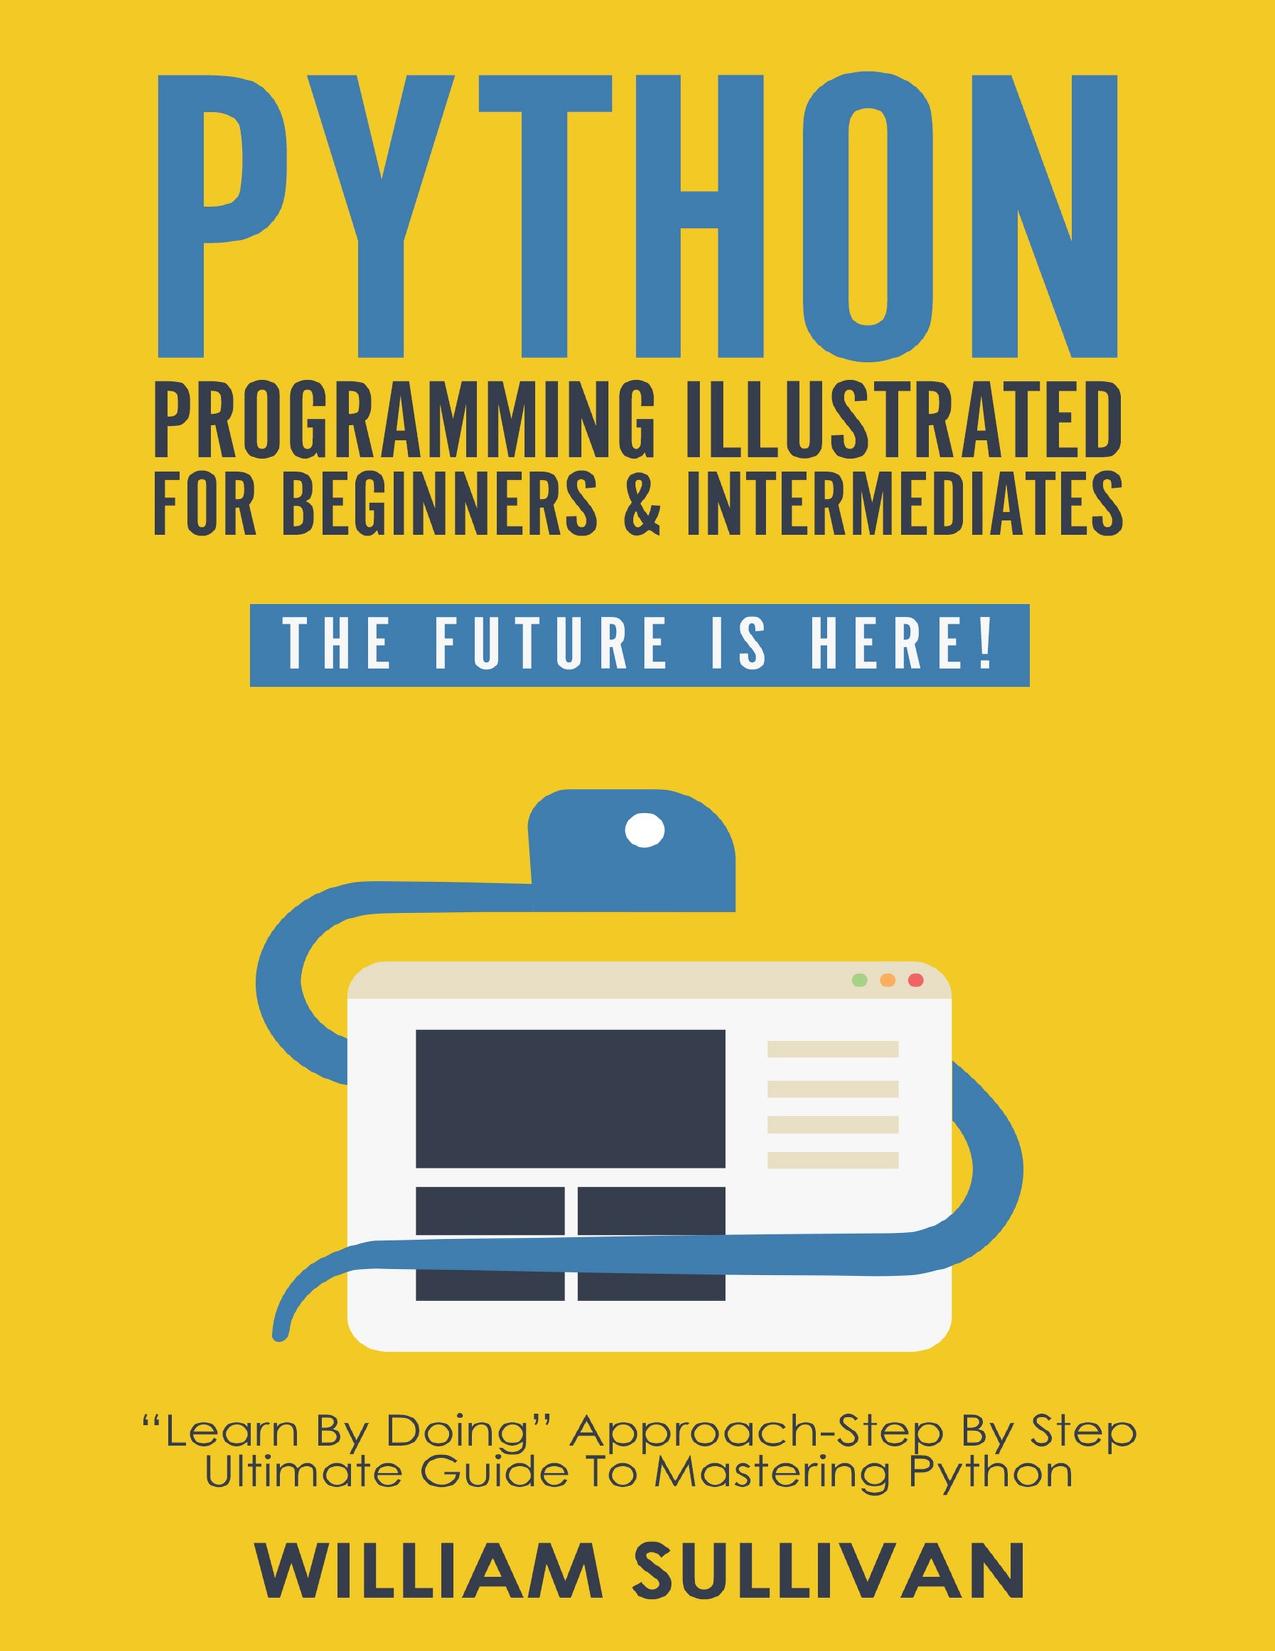 Python Programming Illustrated For Beginners & Intermediates: “Learn By Doing” Approach-Step By Step Ultimate Guide To Mastering Python: The Future Is Here!